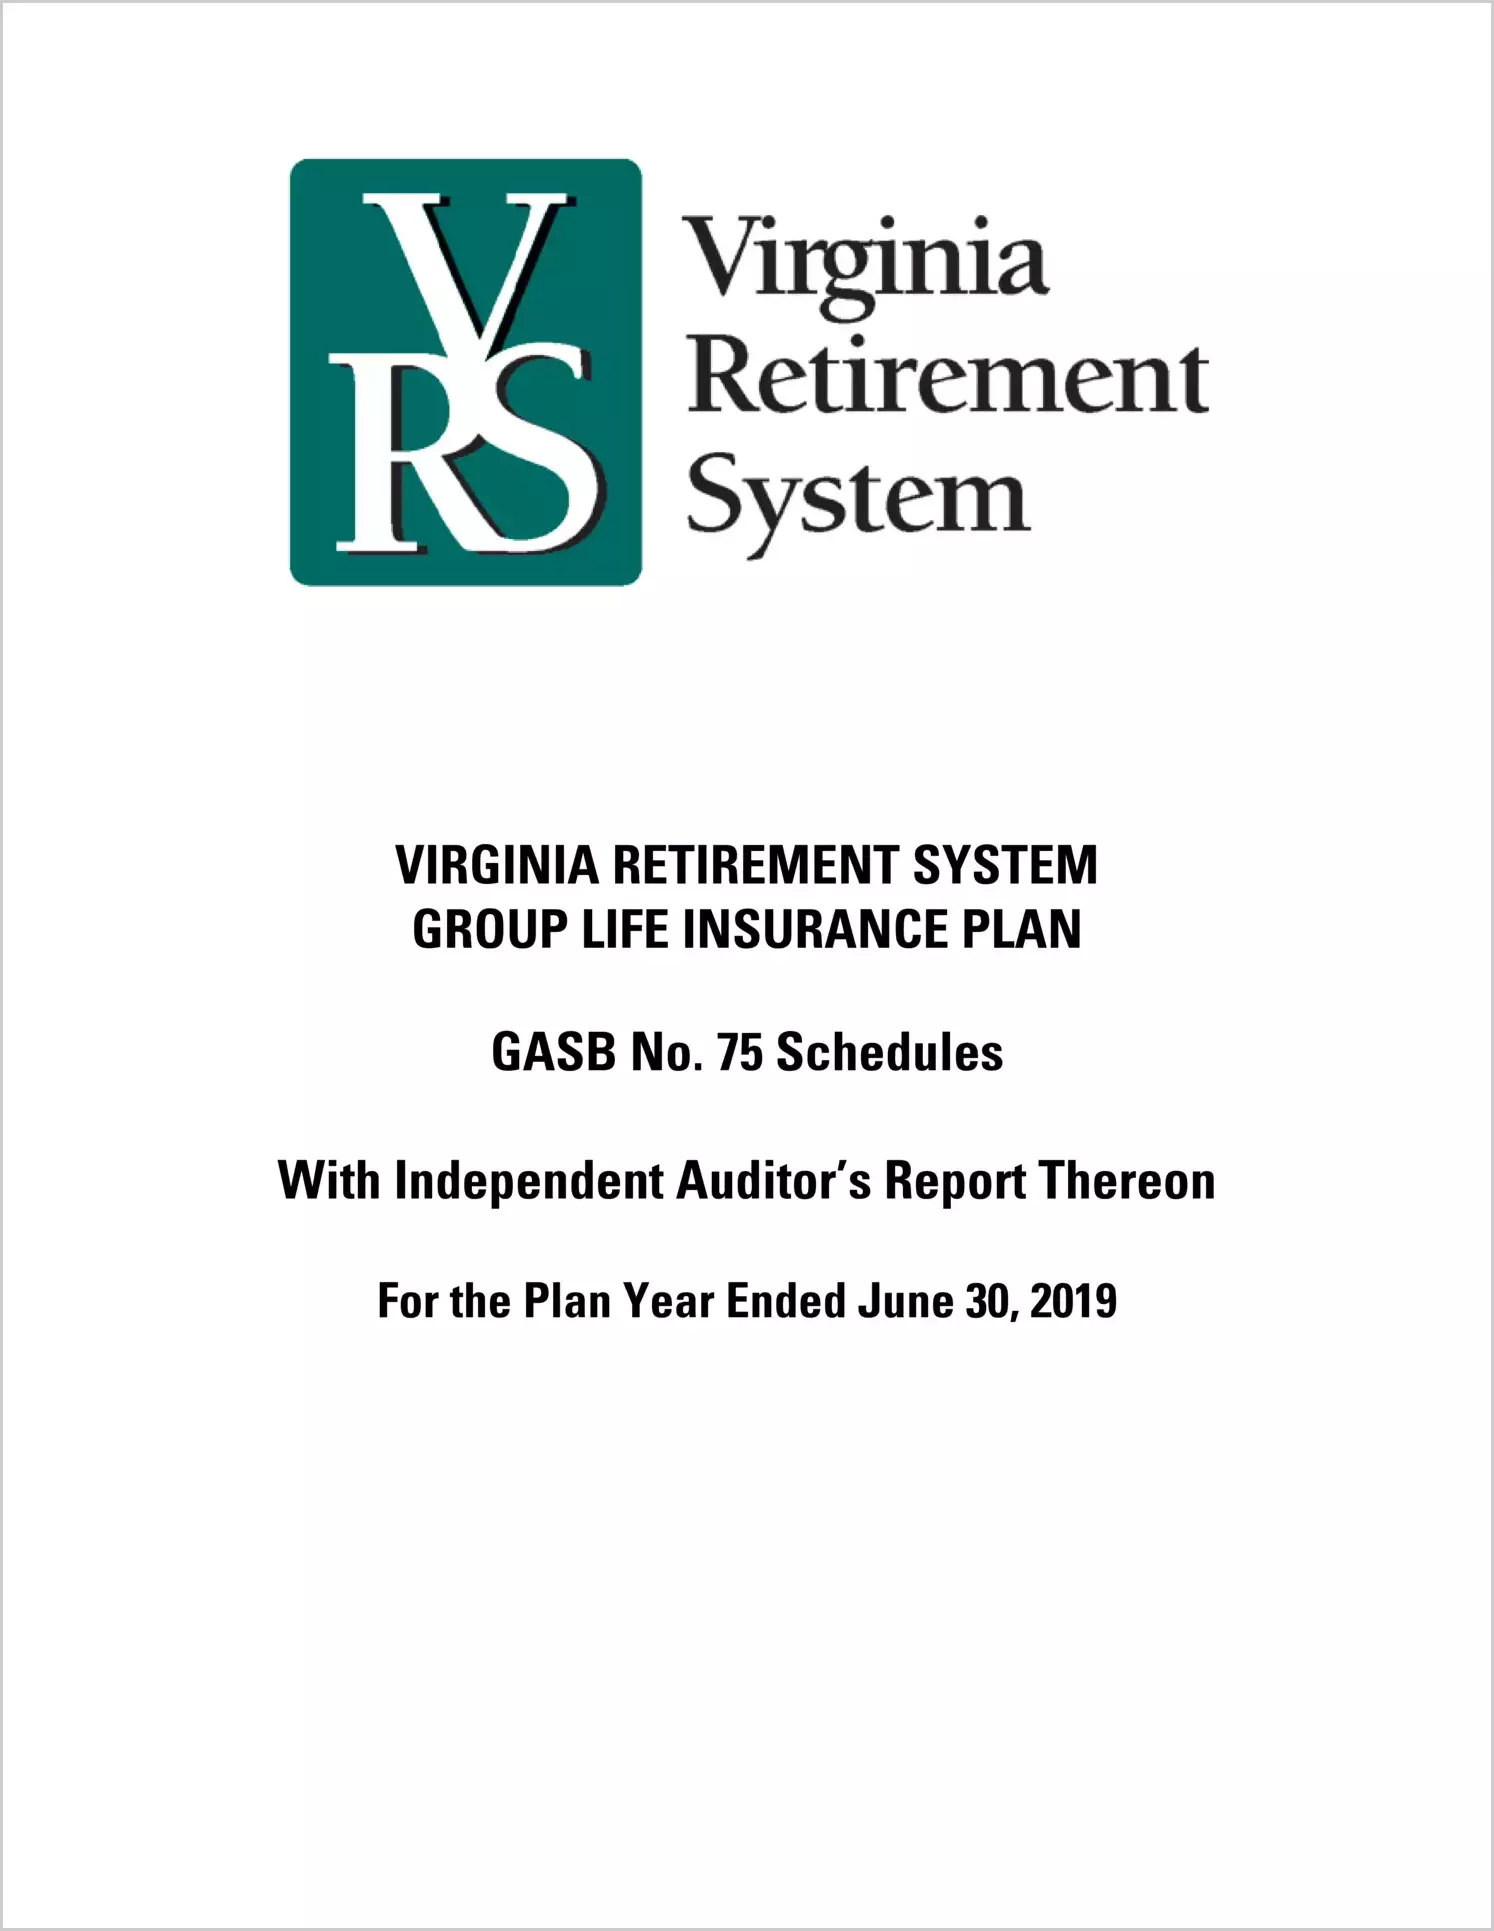 GASB 75 Schedule - Virginia Retirement System Group Life Insurance Plan for the year ended June 30, 2019